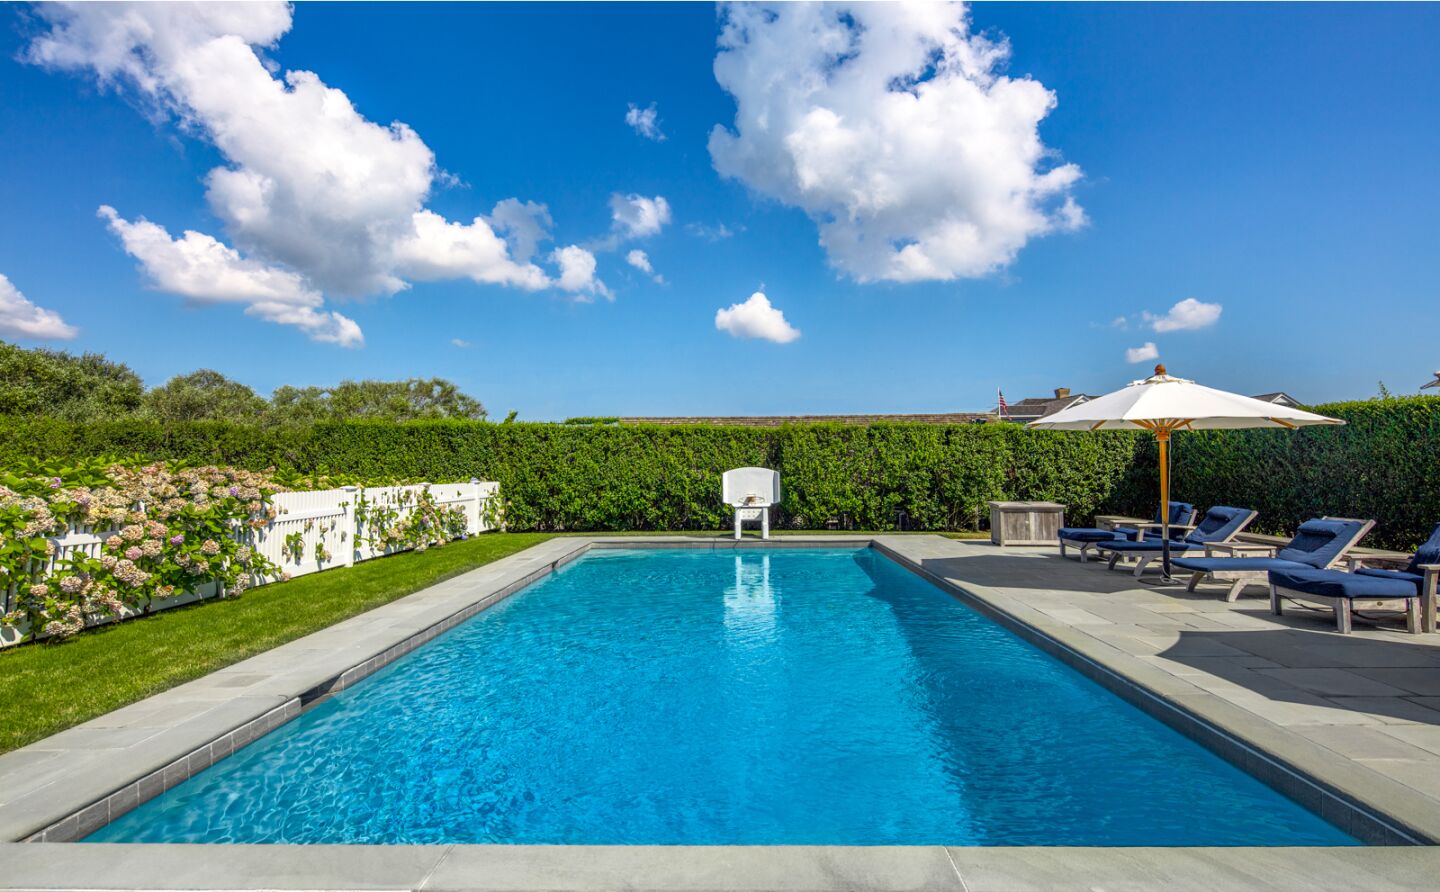 Gwen Verdon's former Quogue home: the pool